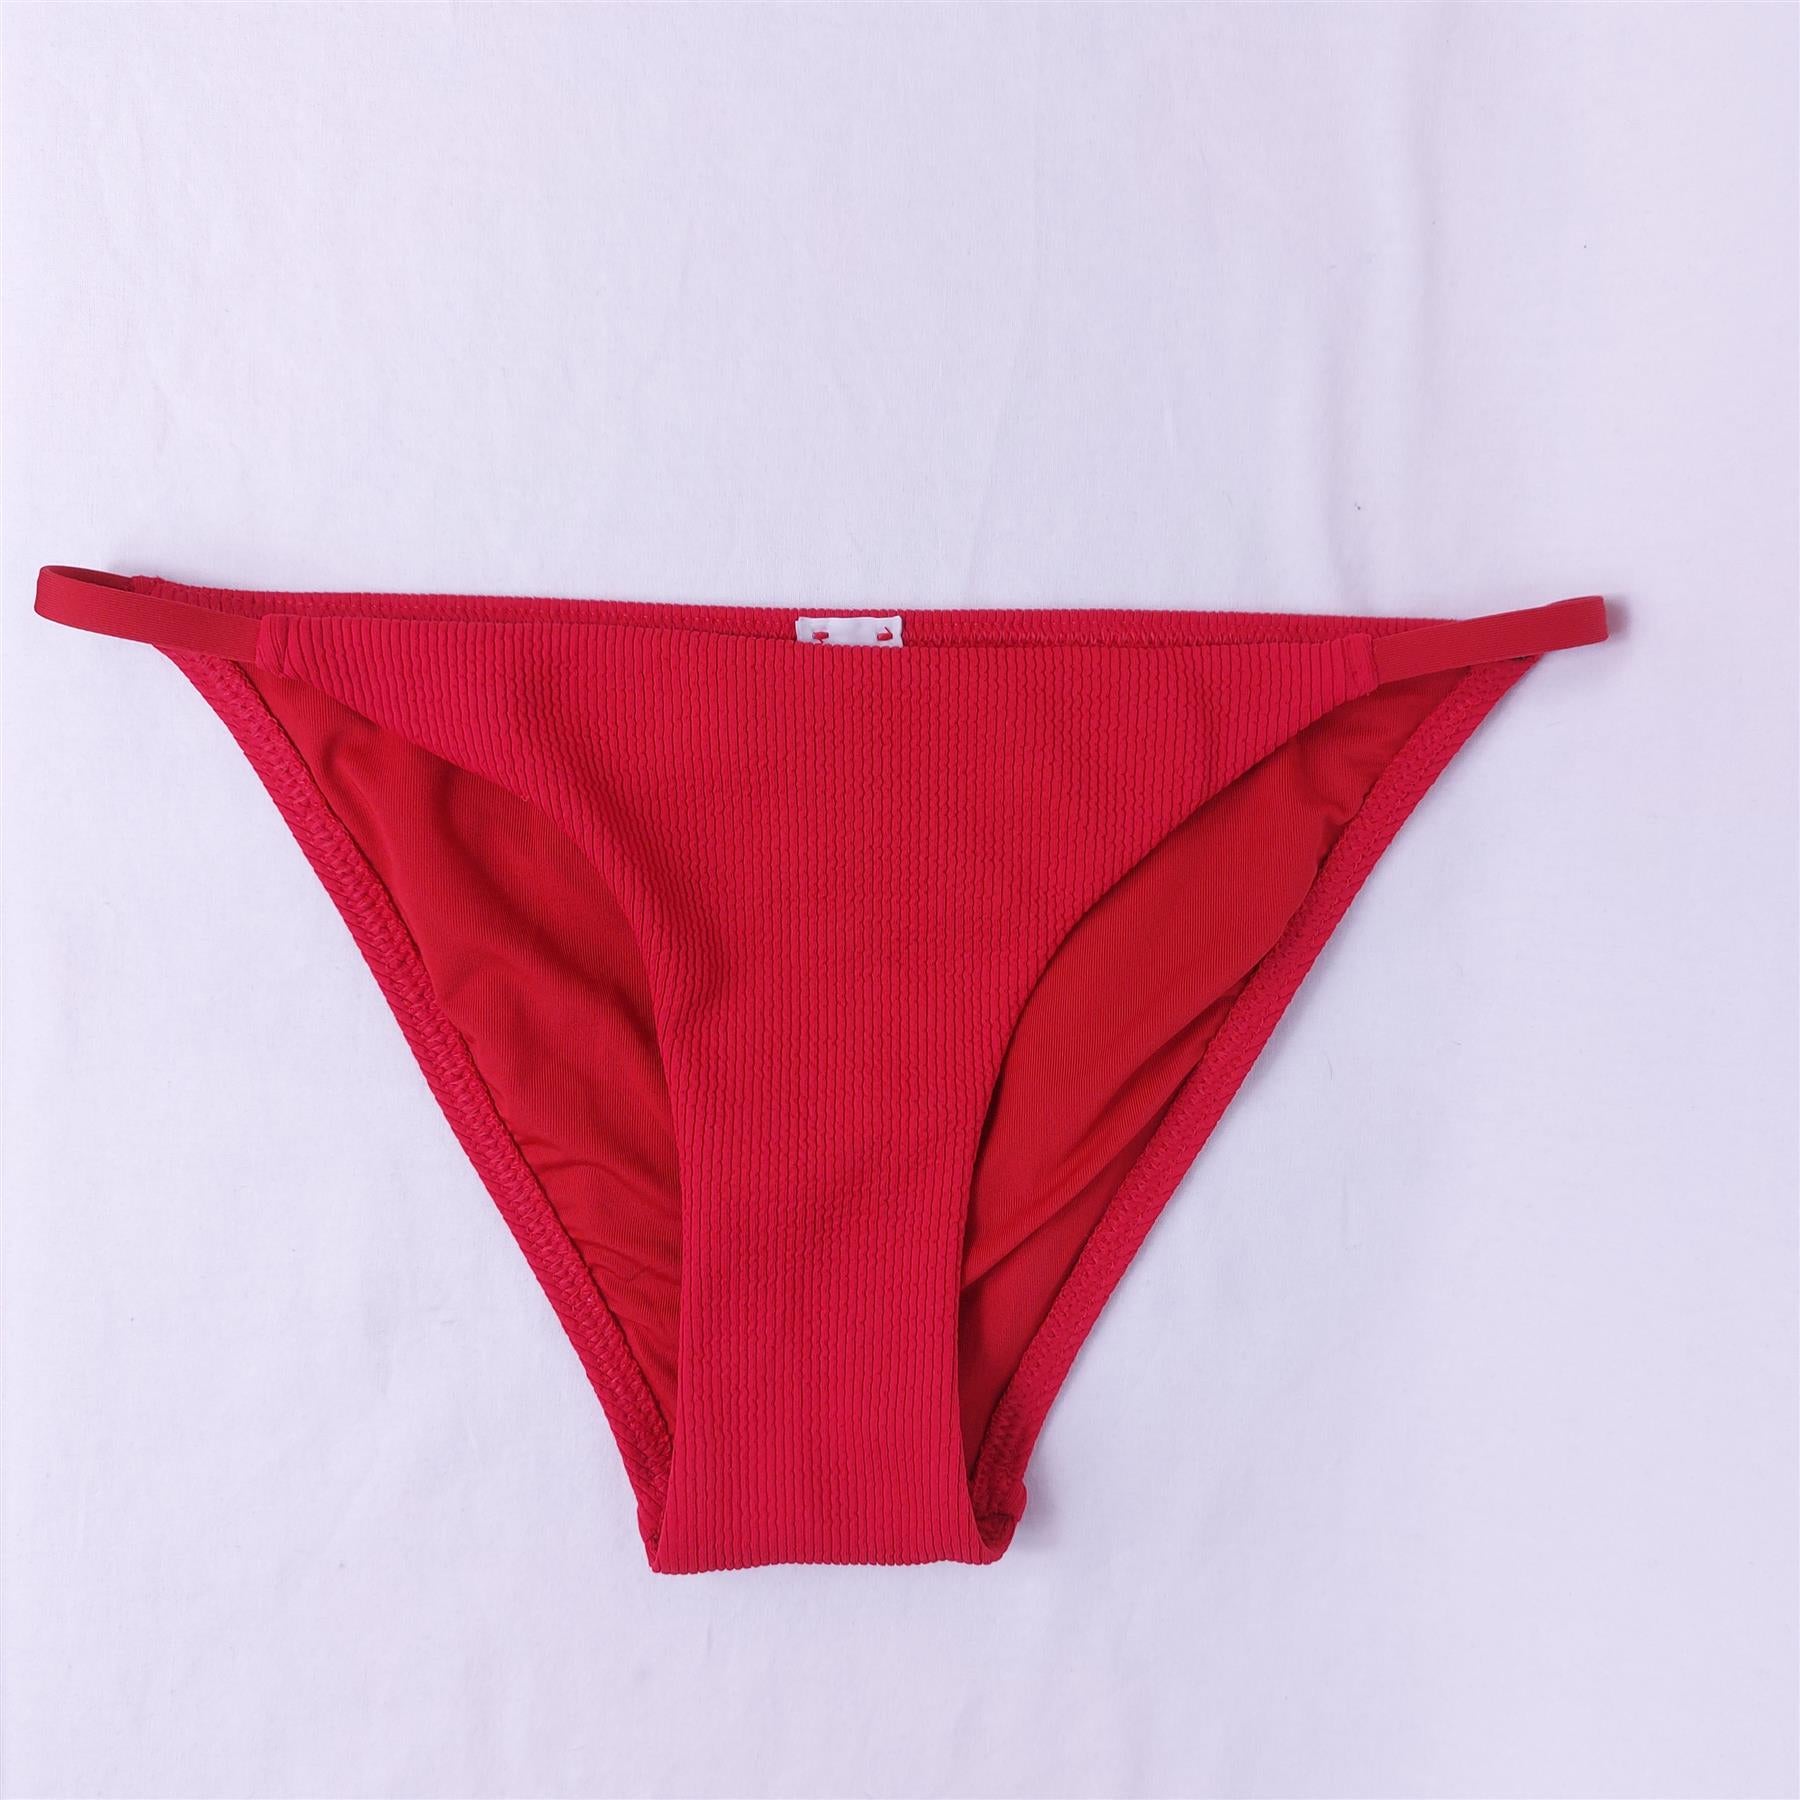 Thong Underwear: What are the Pros & Cons? by Xixili Rio - Issuu